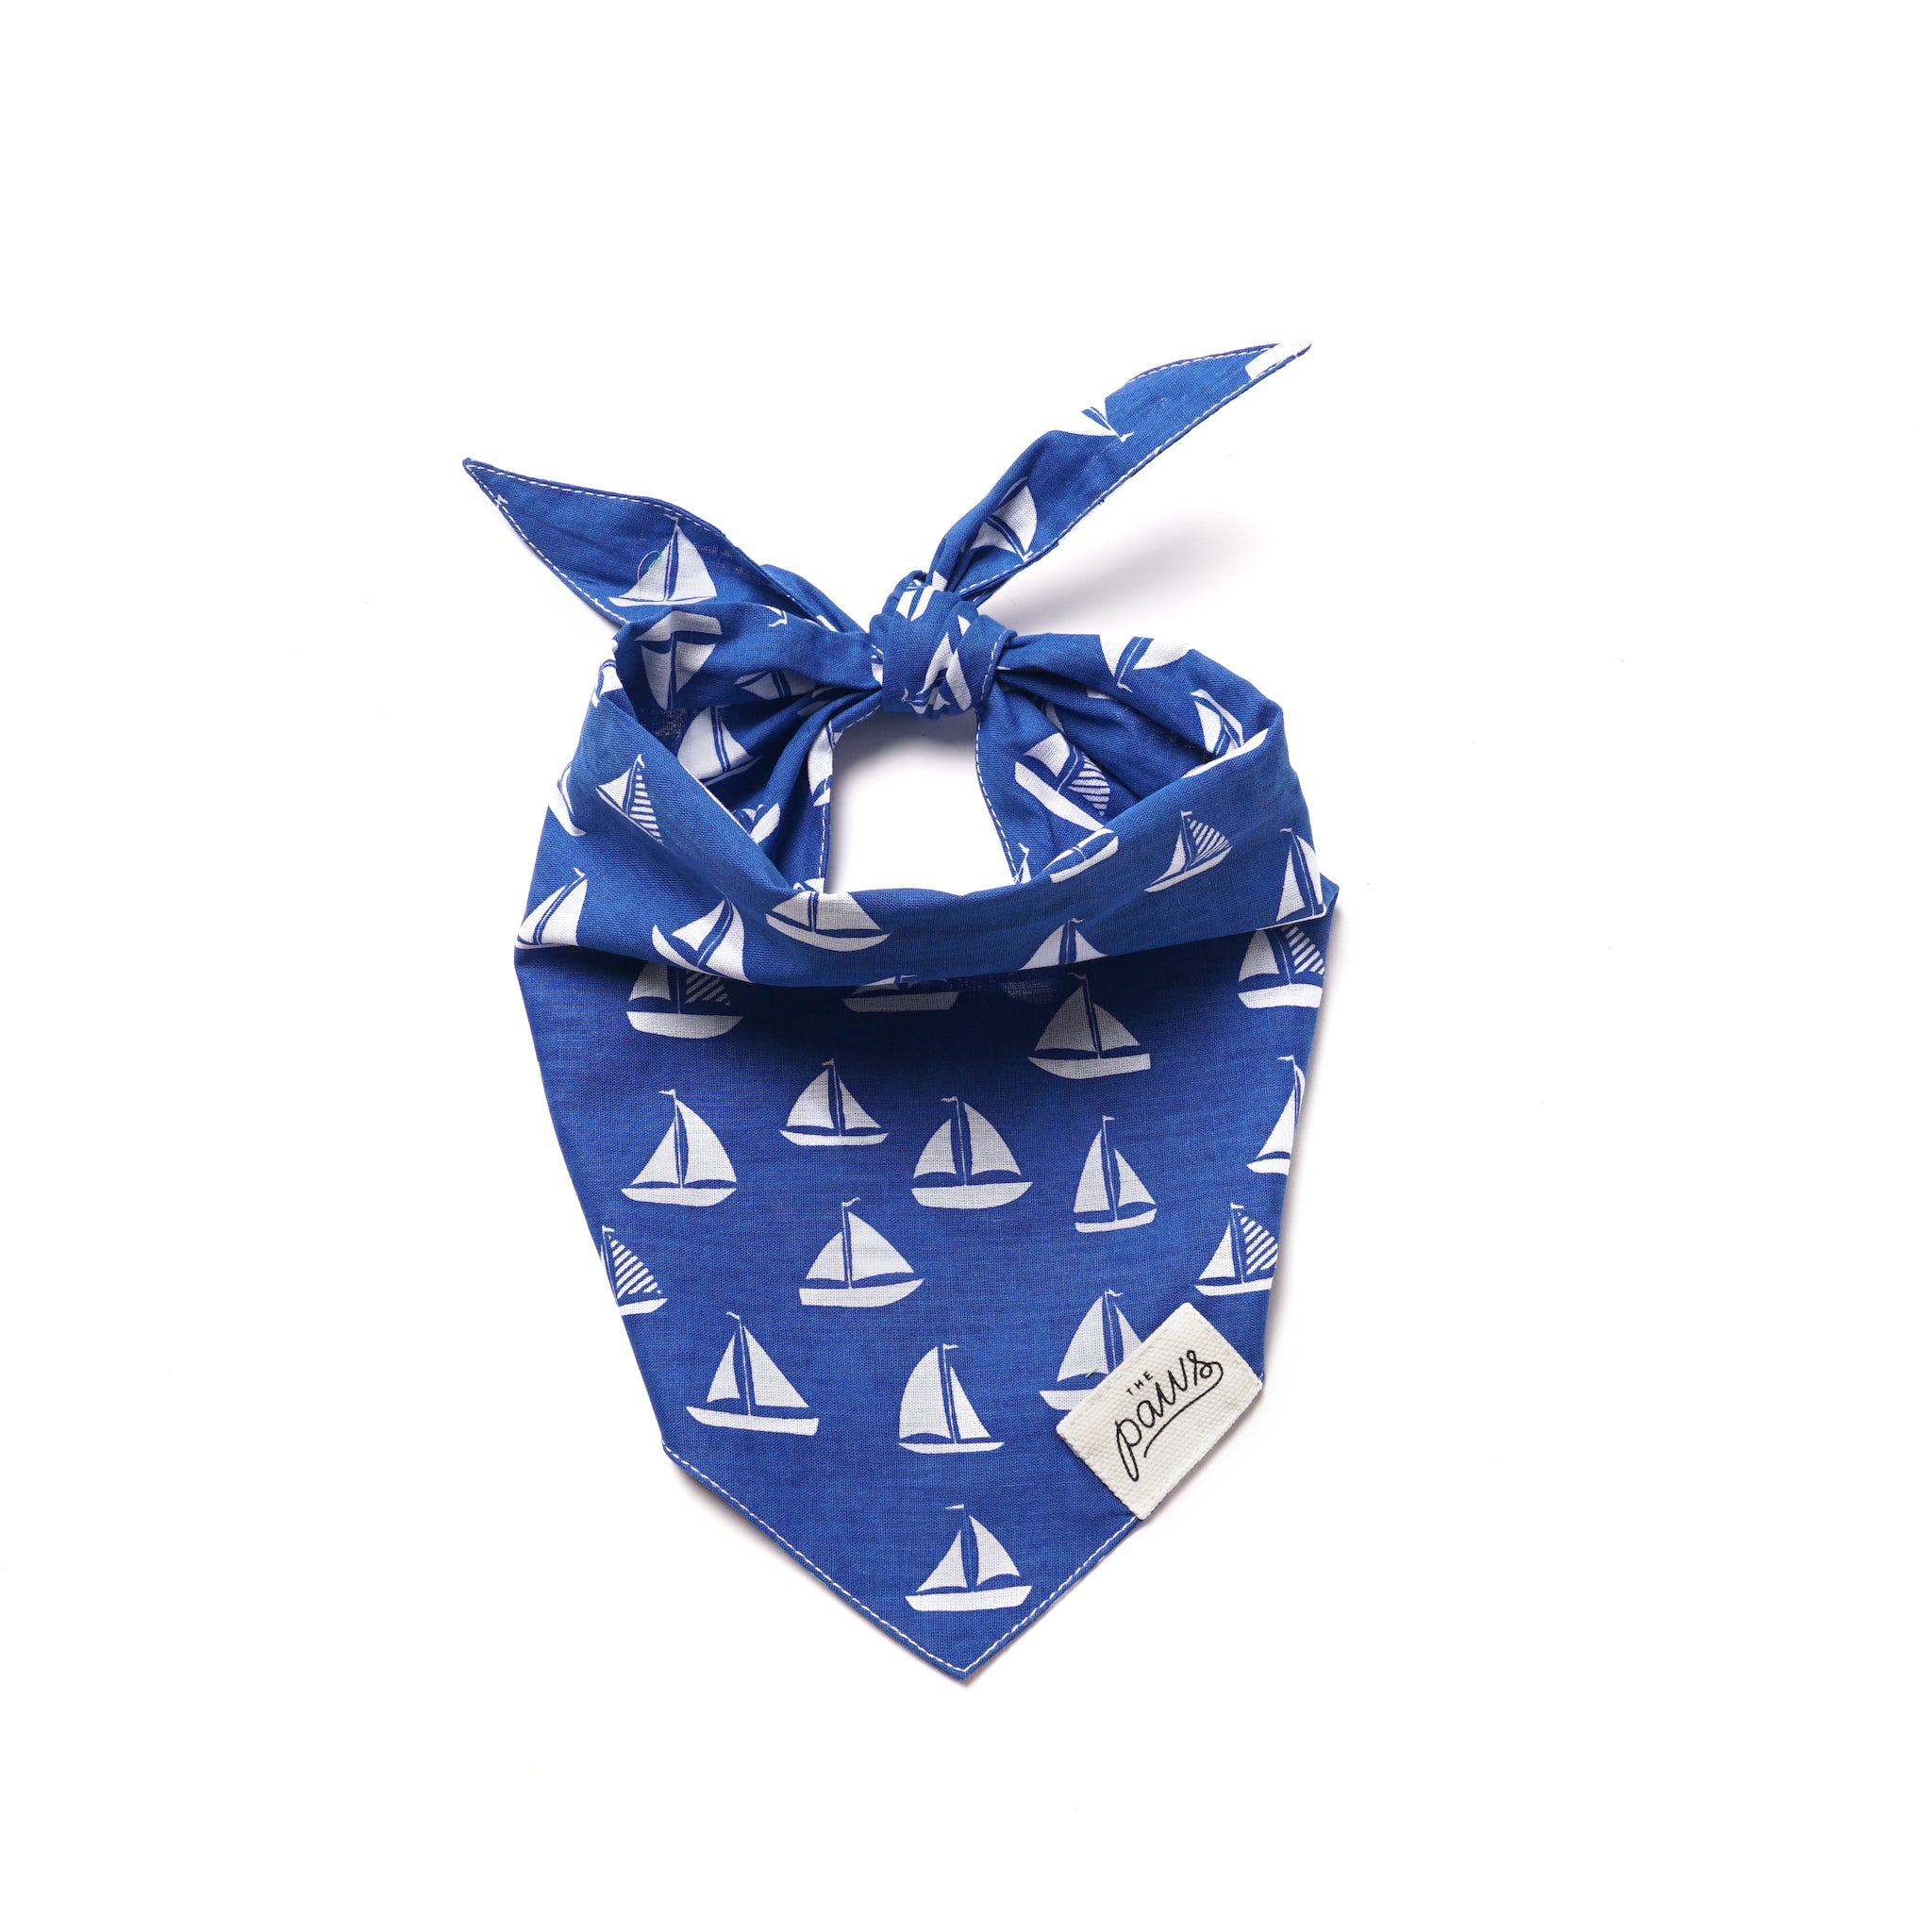 Sailing Bandana from The Paws